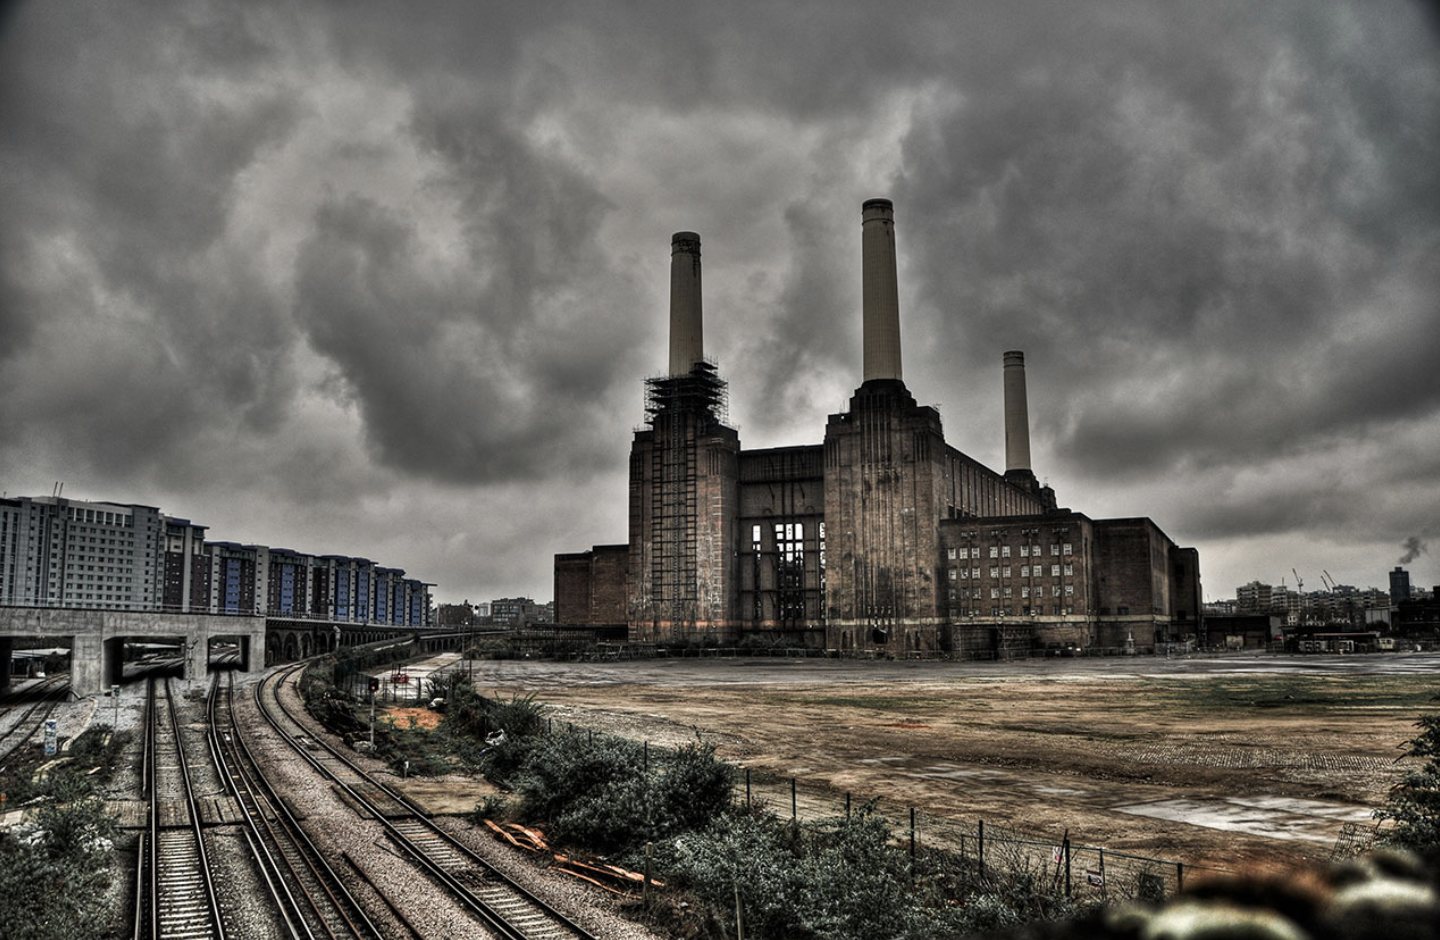 Battersea Power station now sold to Malaysian developed to turn into residential apartments this iconic South West London landmark and decommissioned coal-fired power station is an evocative Grade II listed building. 